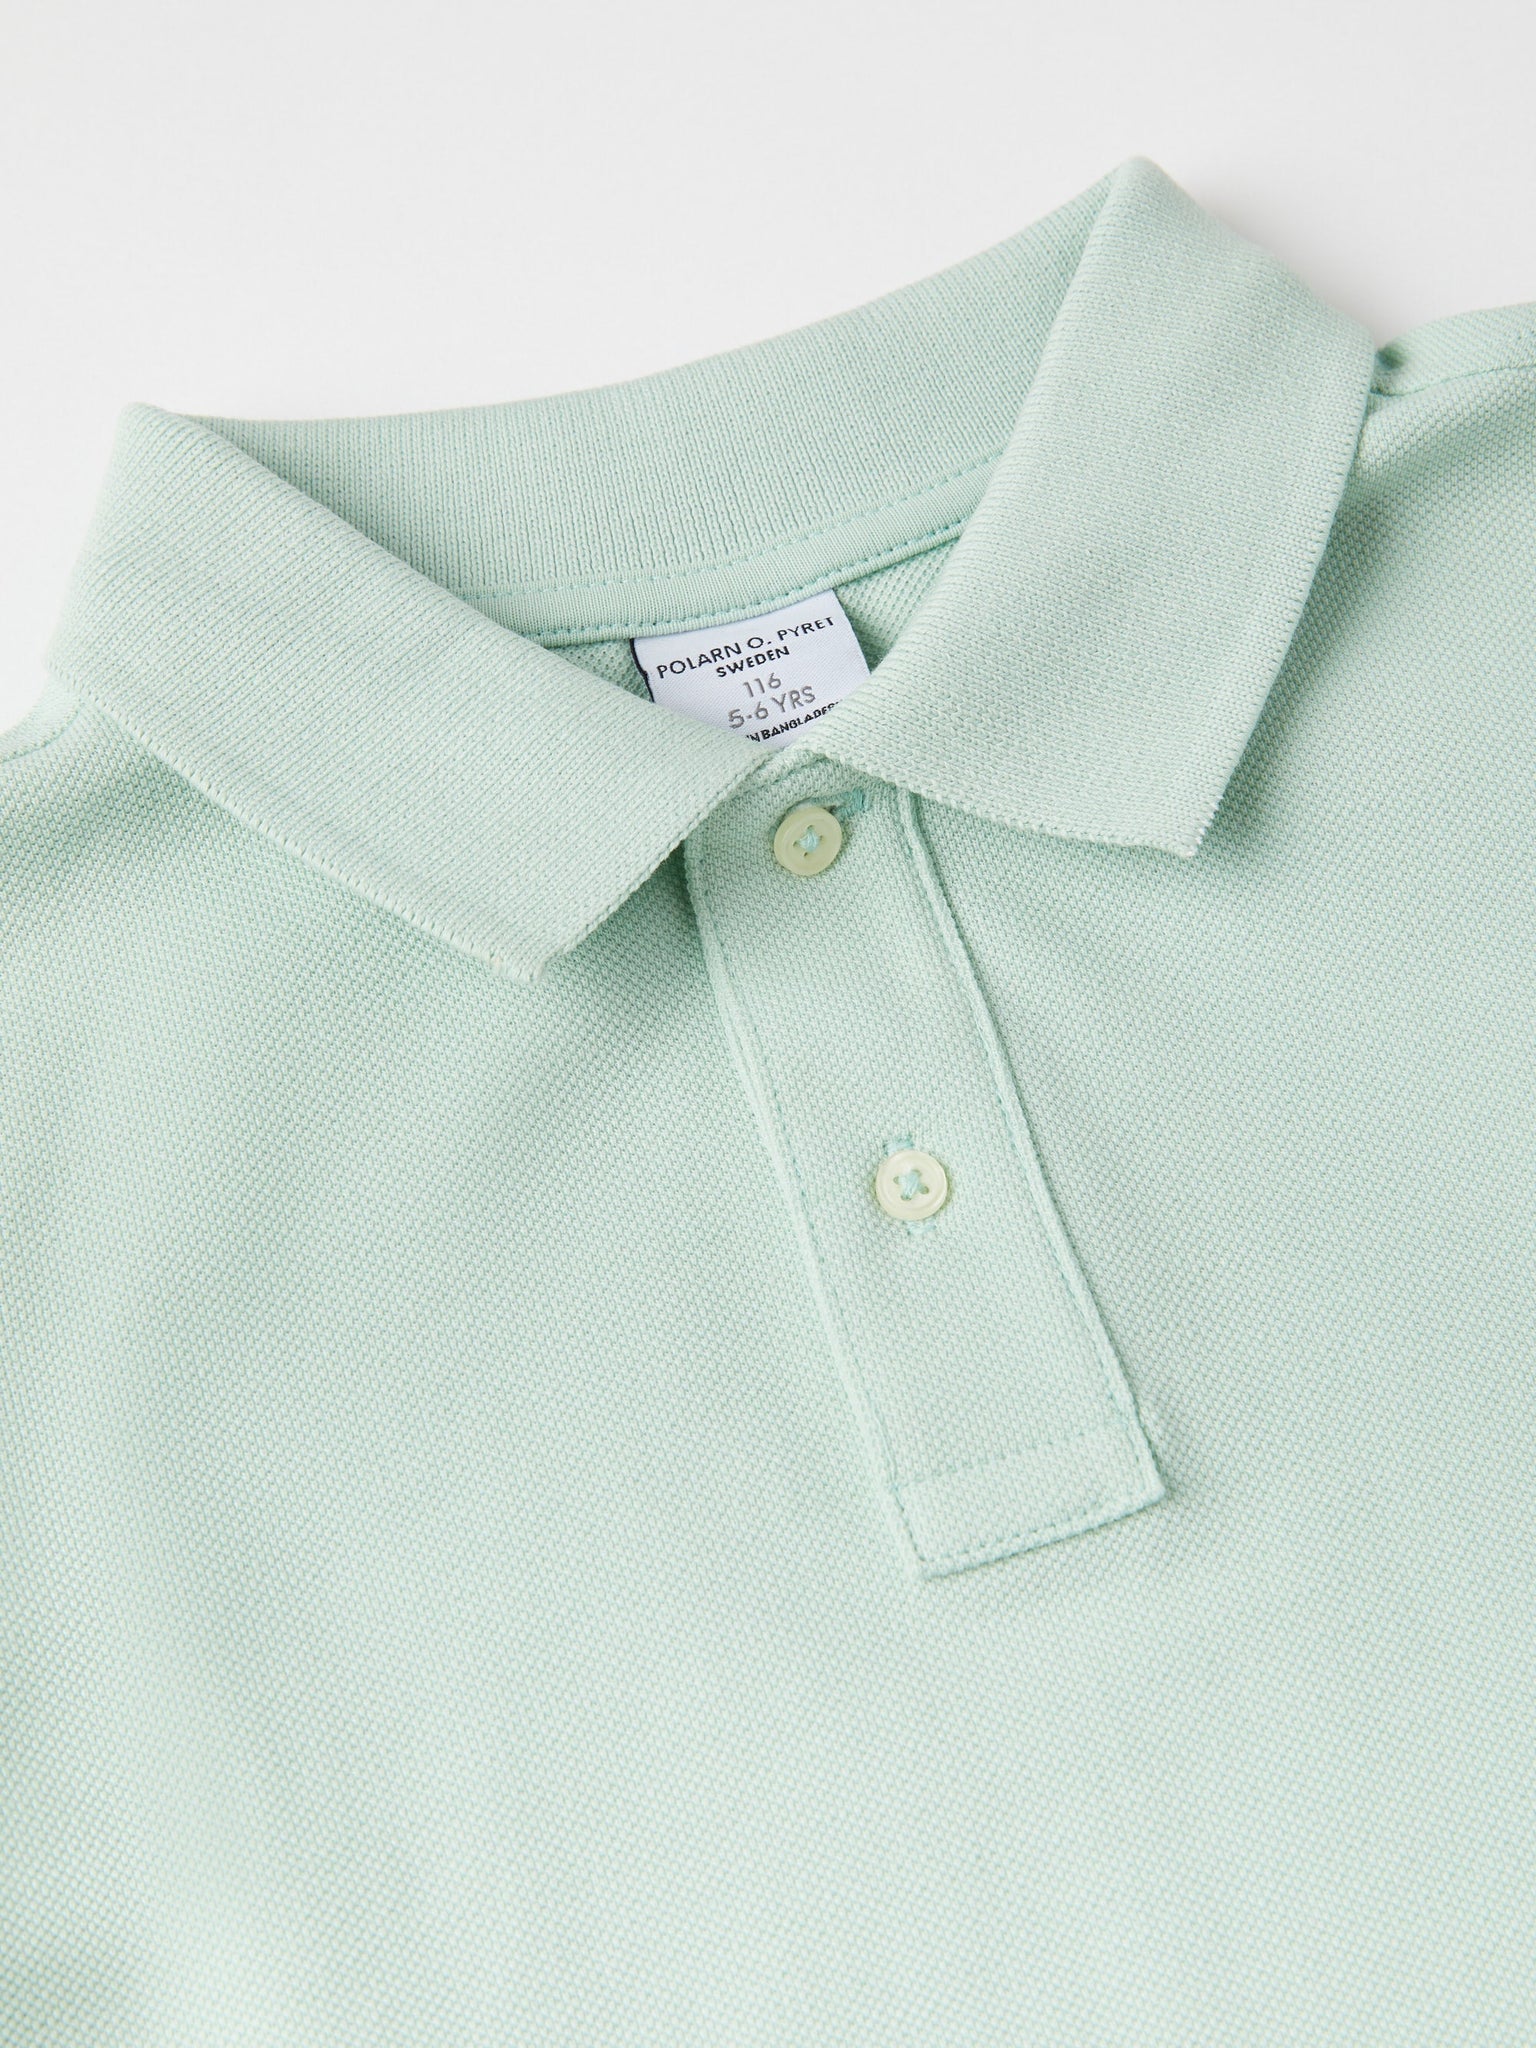 Green Kids Polo Shirt from the Polarn O. Pyret kidswear collection. Nordic kids clothes made from sustainable sources.